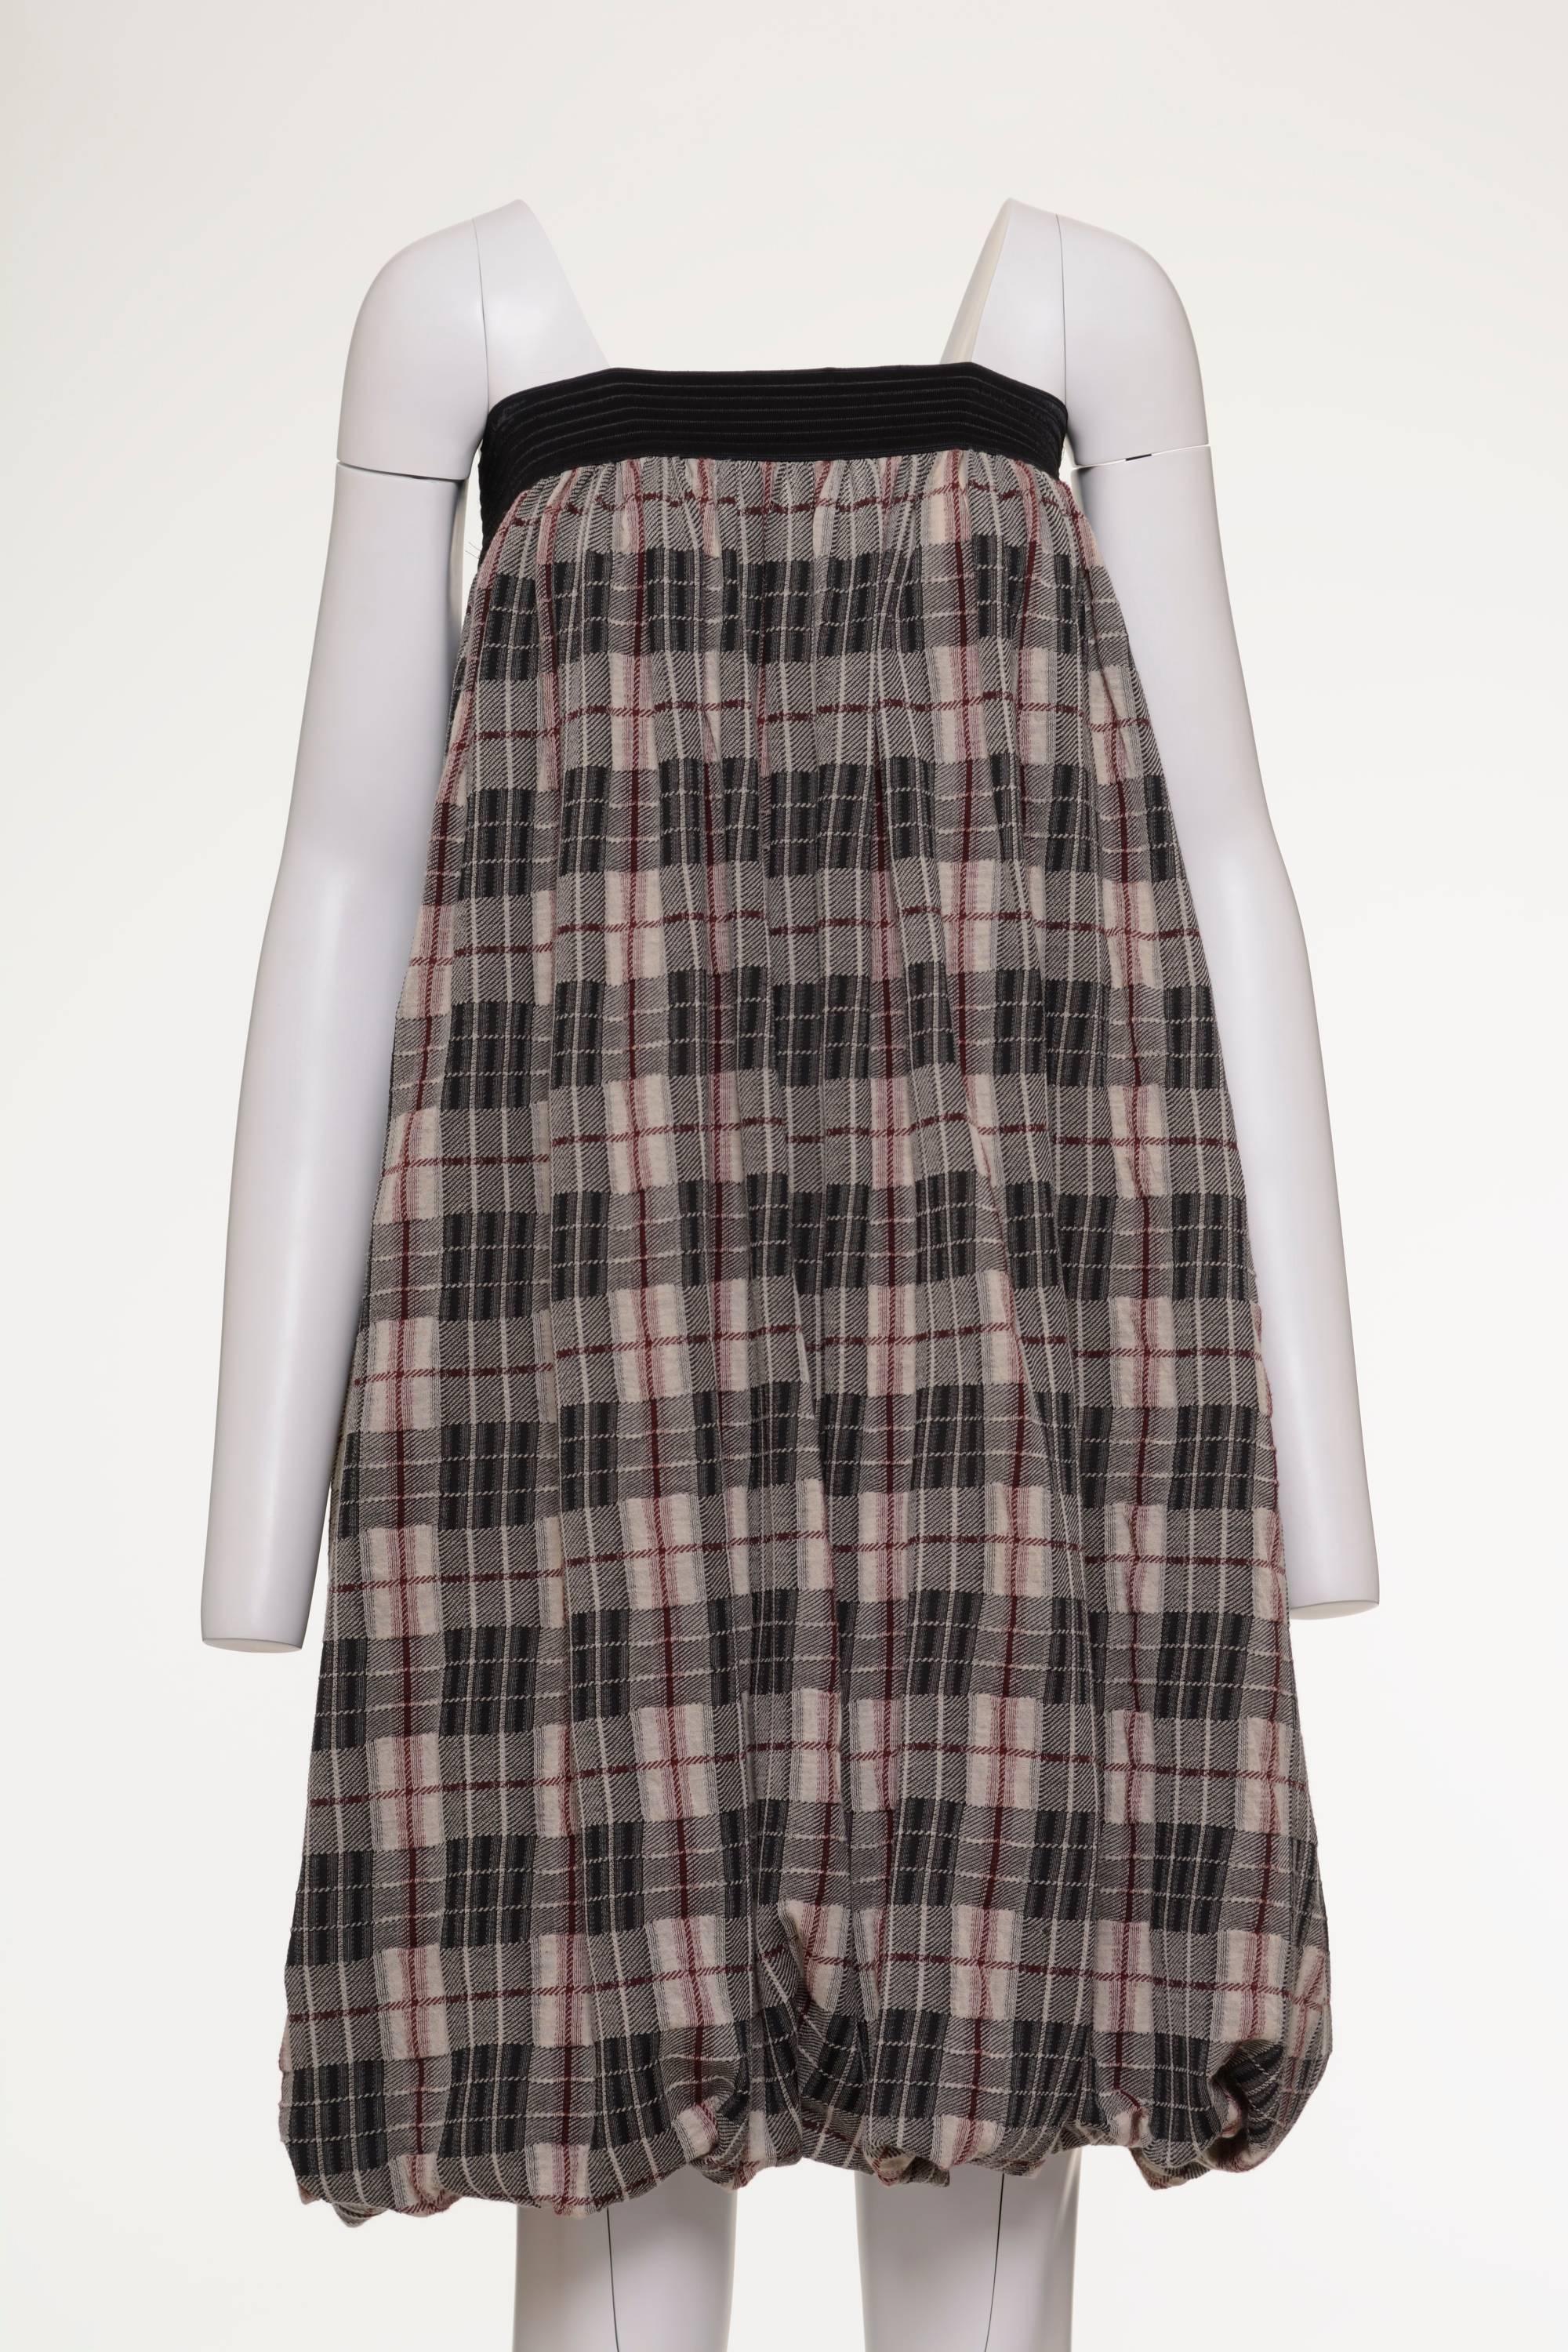 This amazing 1990s Jean Paul Gaultier dress is made with a black and gray tartan print cotton fabric. It's an incredible multimode dress, it can be worn as a long dress, short dress or long skirt. It has black elasticated waist and elasticated hem.